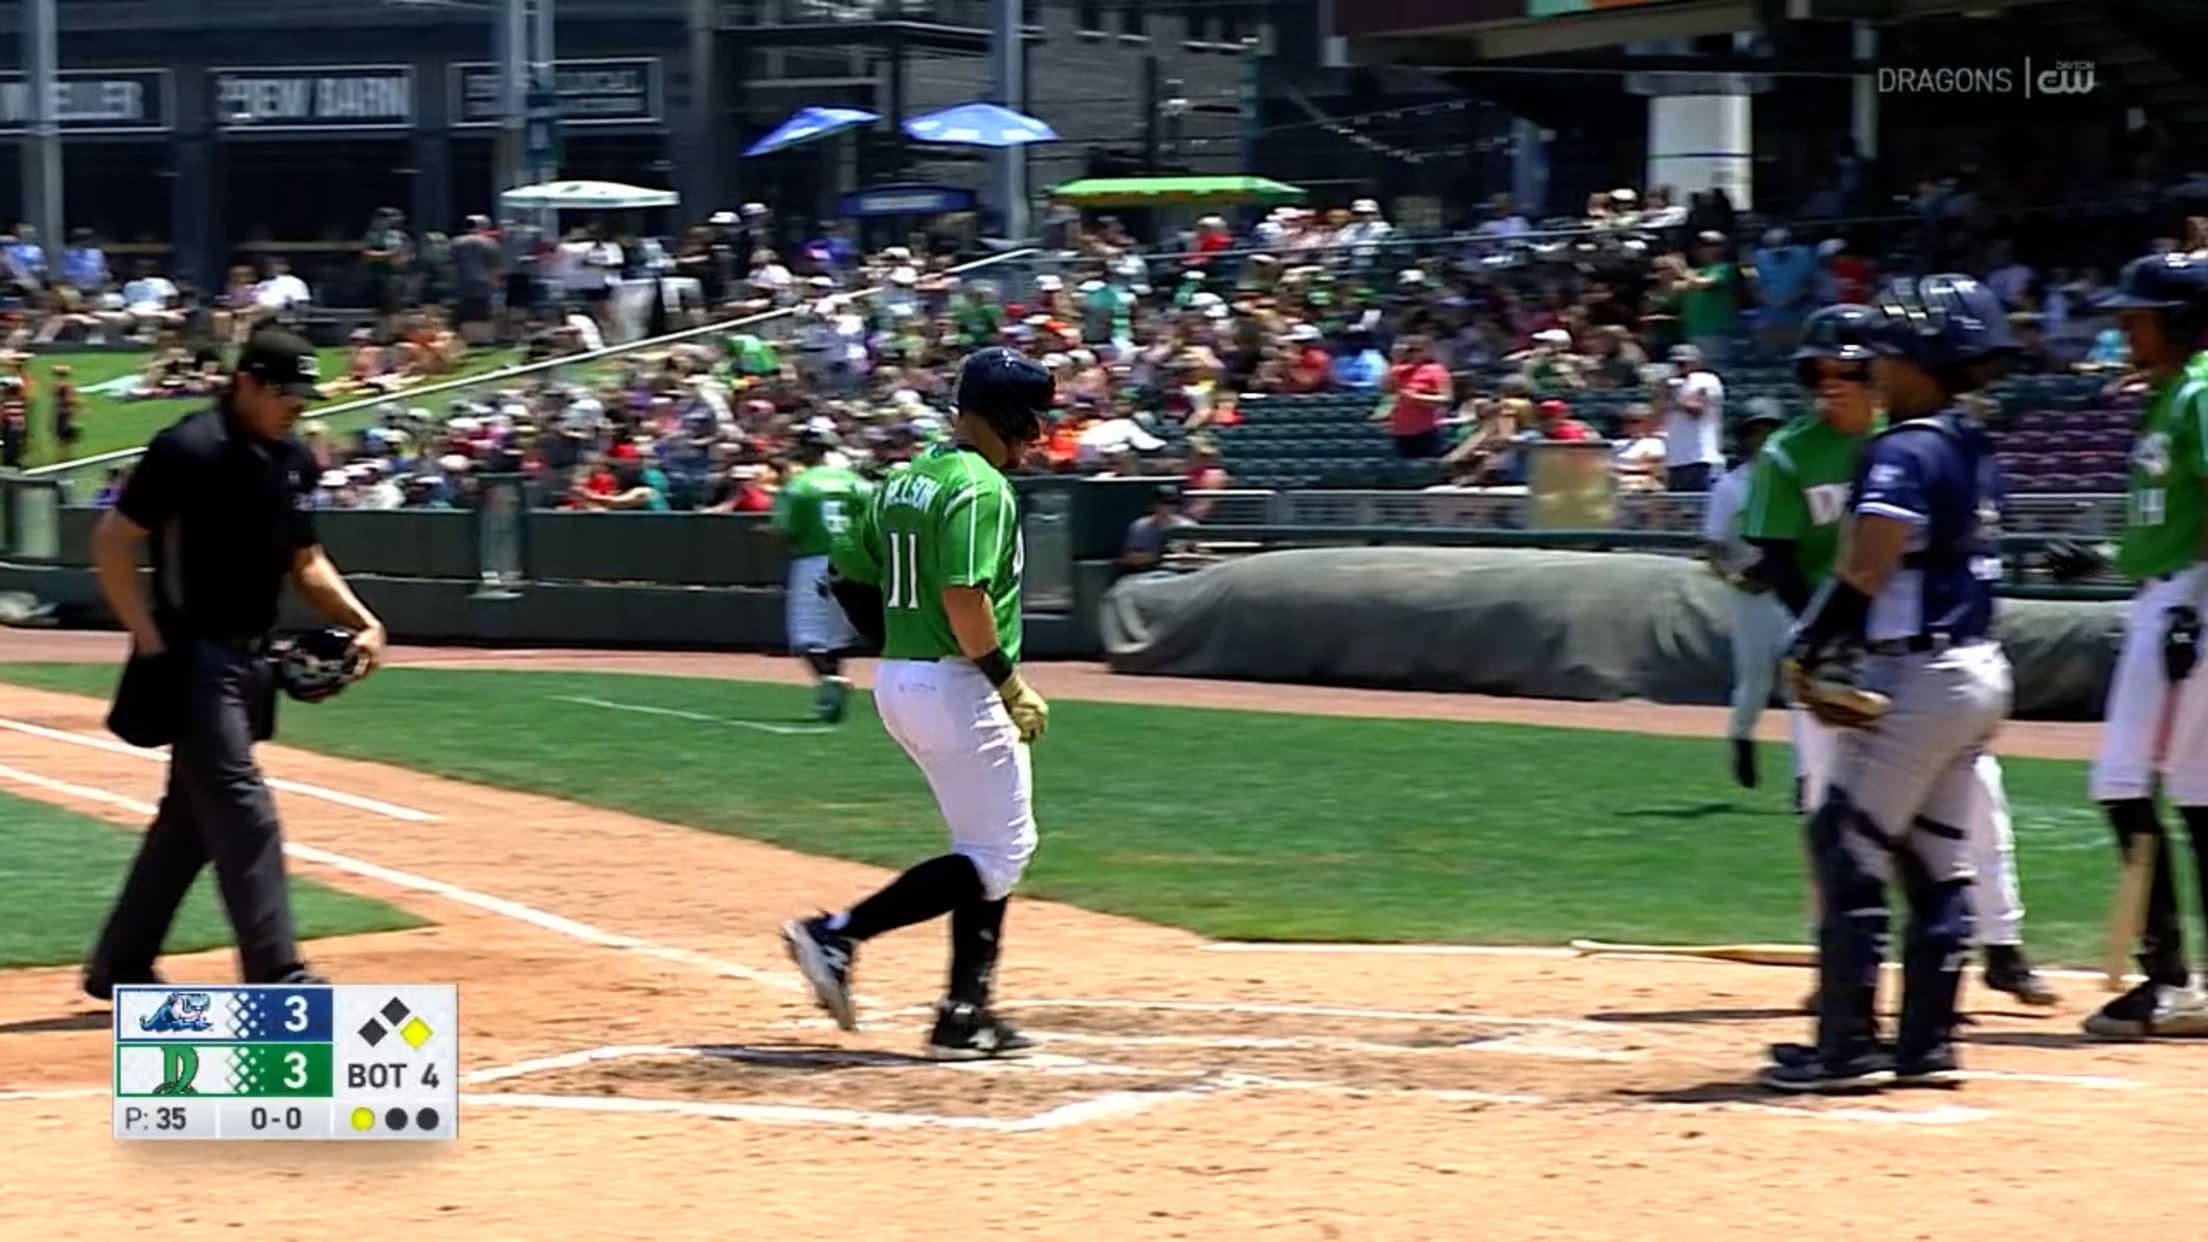 Matheu Nelson's two homer game